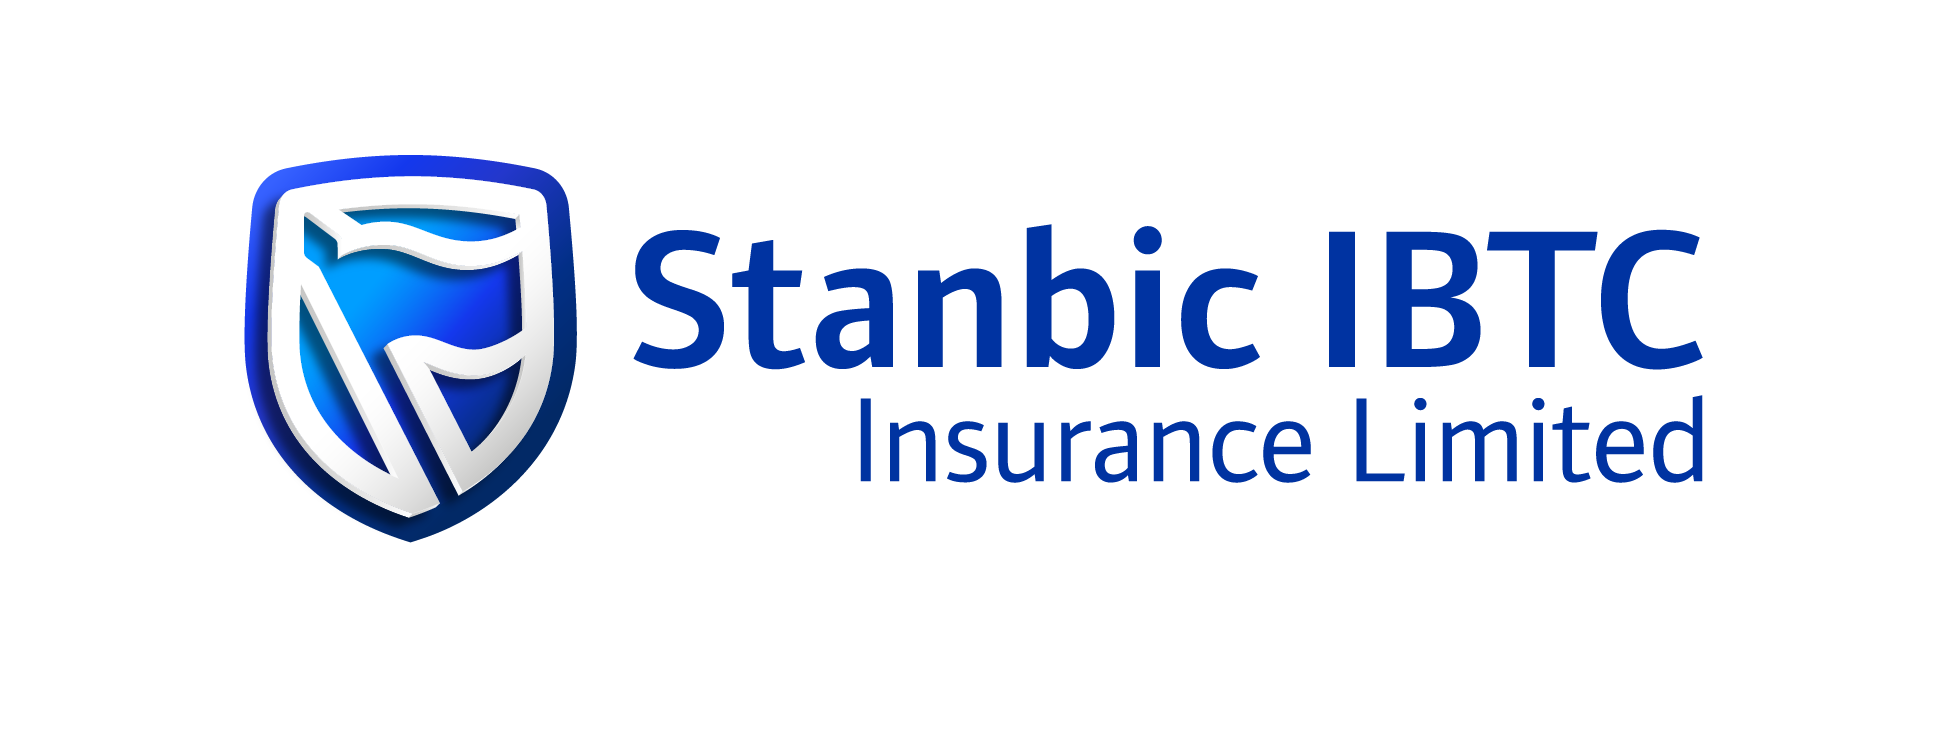 Stanbic IBTC Expands Services With Life Insurance Subsidiary